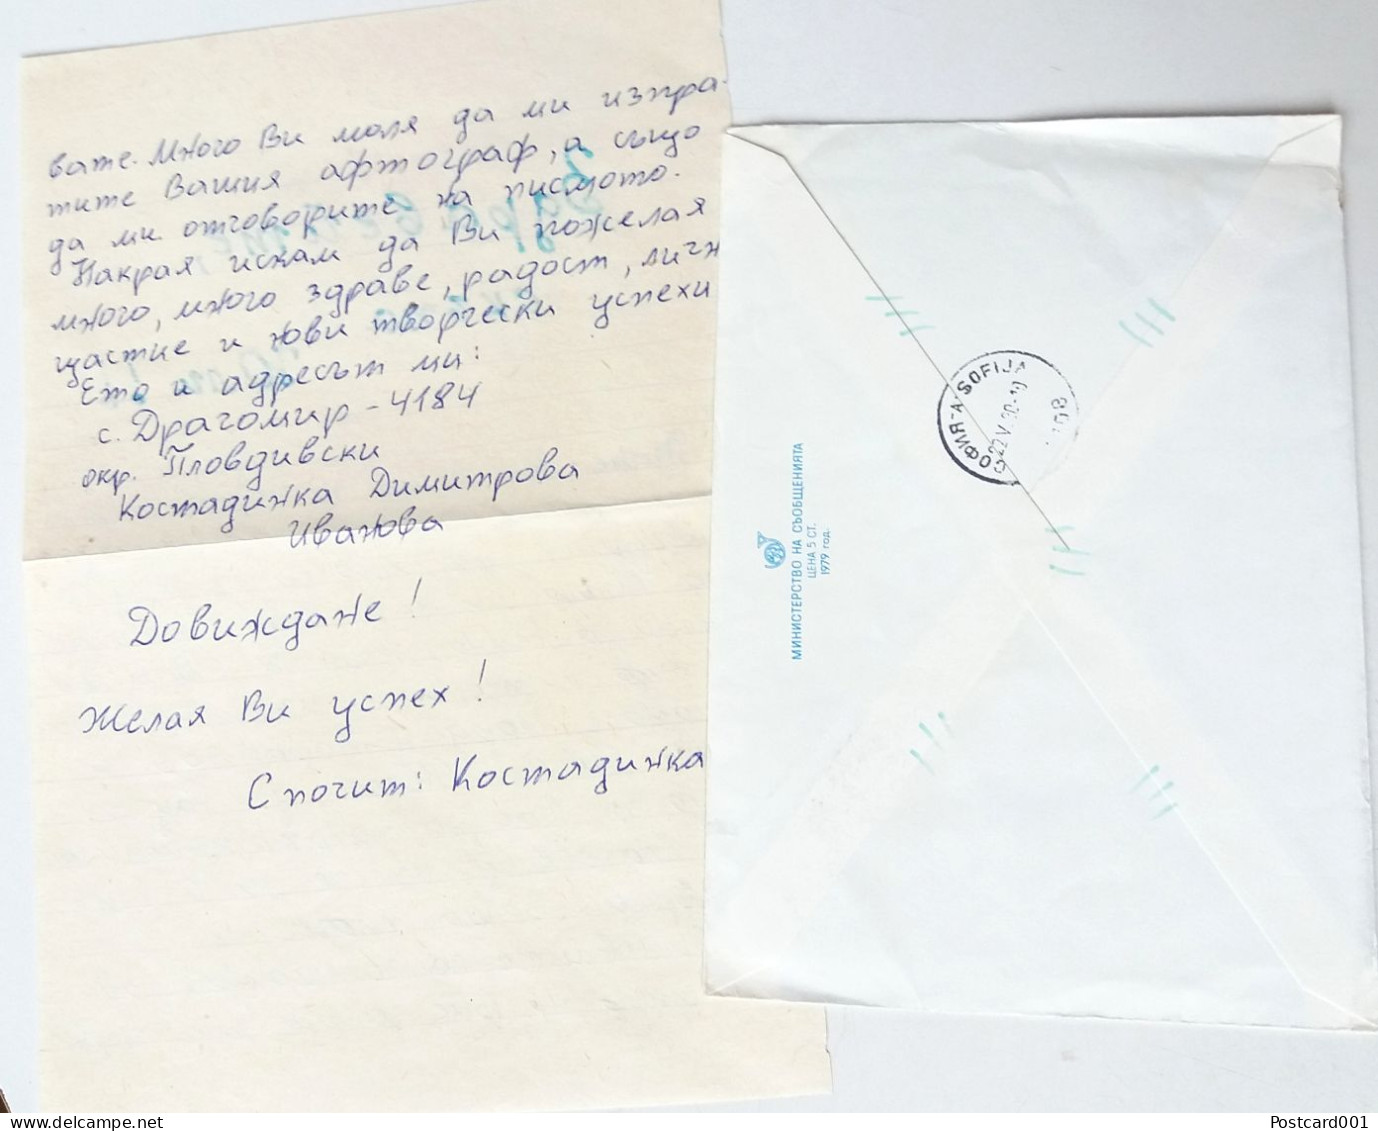 #89 Traveled Envelope Black Sea Coast And Letter Cirillic Manuscript Bulgaria 1980 -  Stamp Local Mail - Covers & Documents